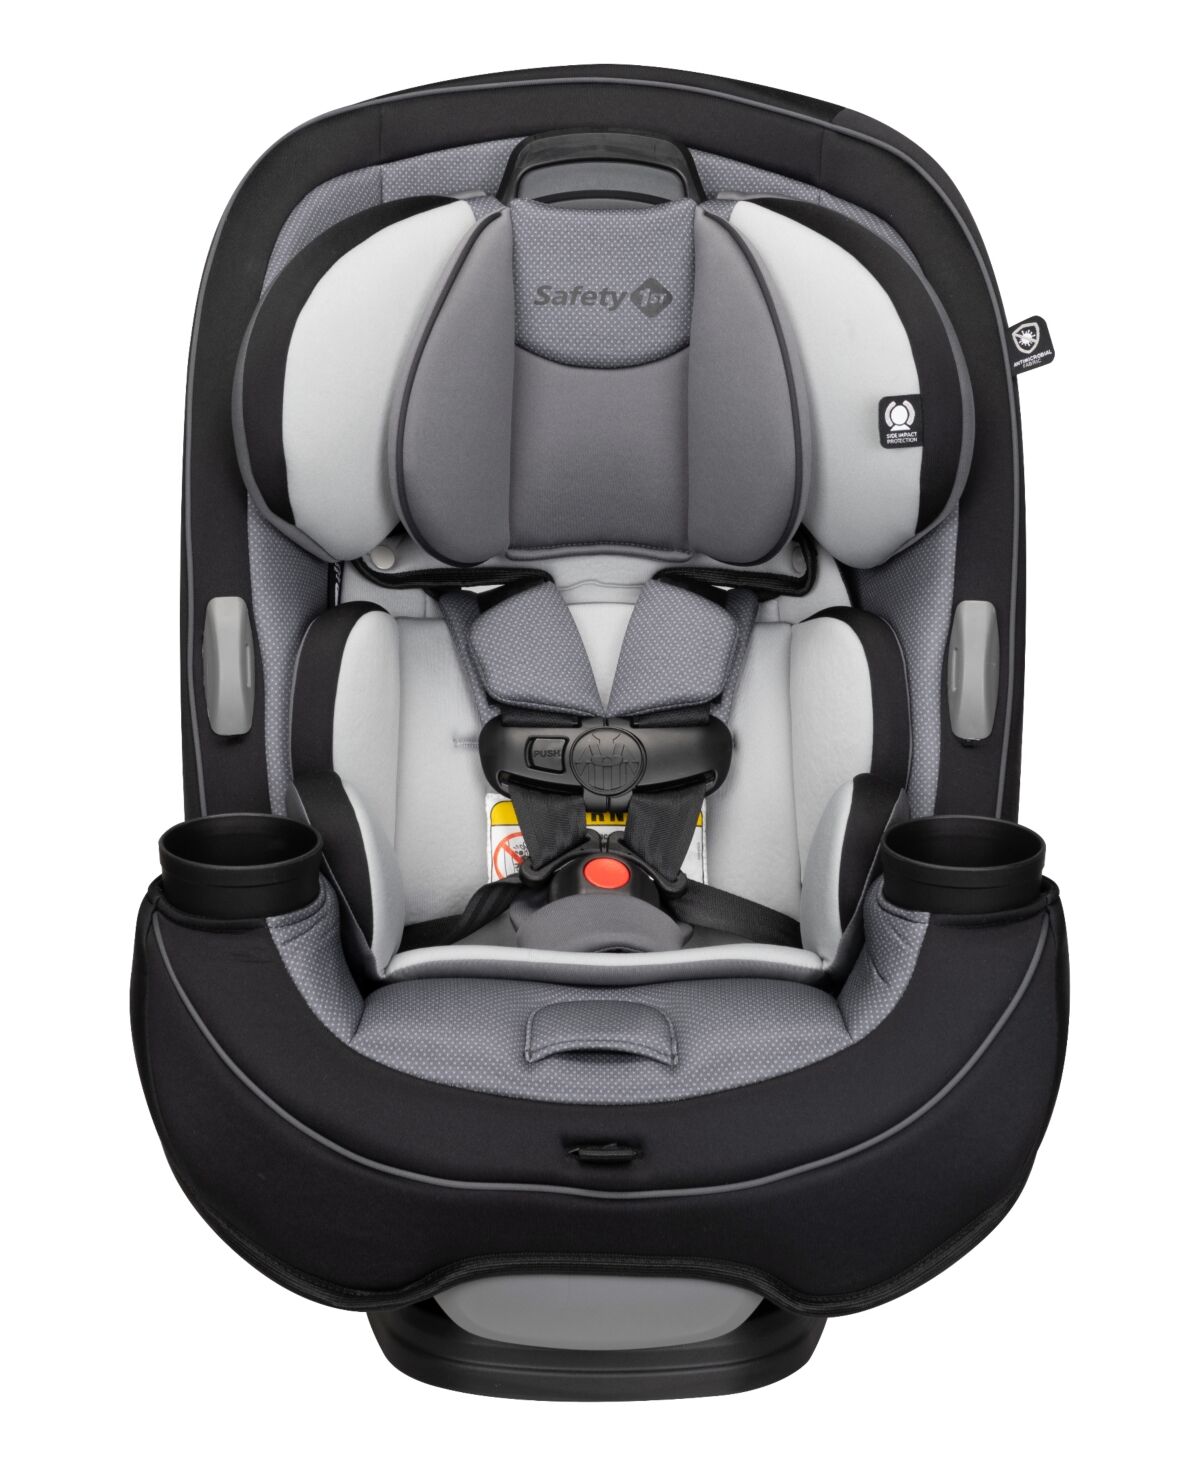 Safety 1st Baby Grow and Go All-In-One Convertible Car Seat - High Street